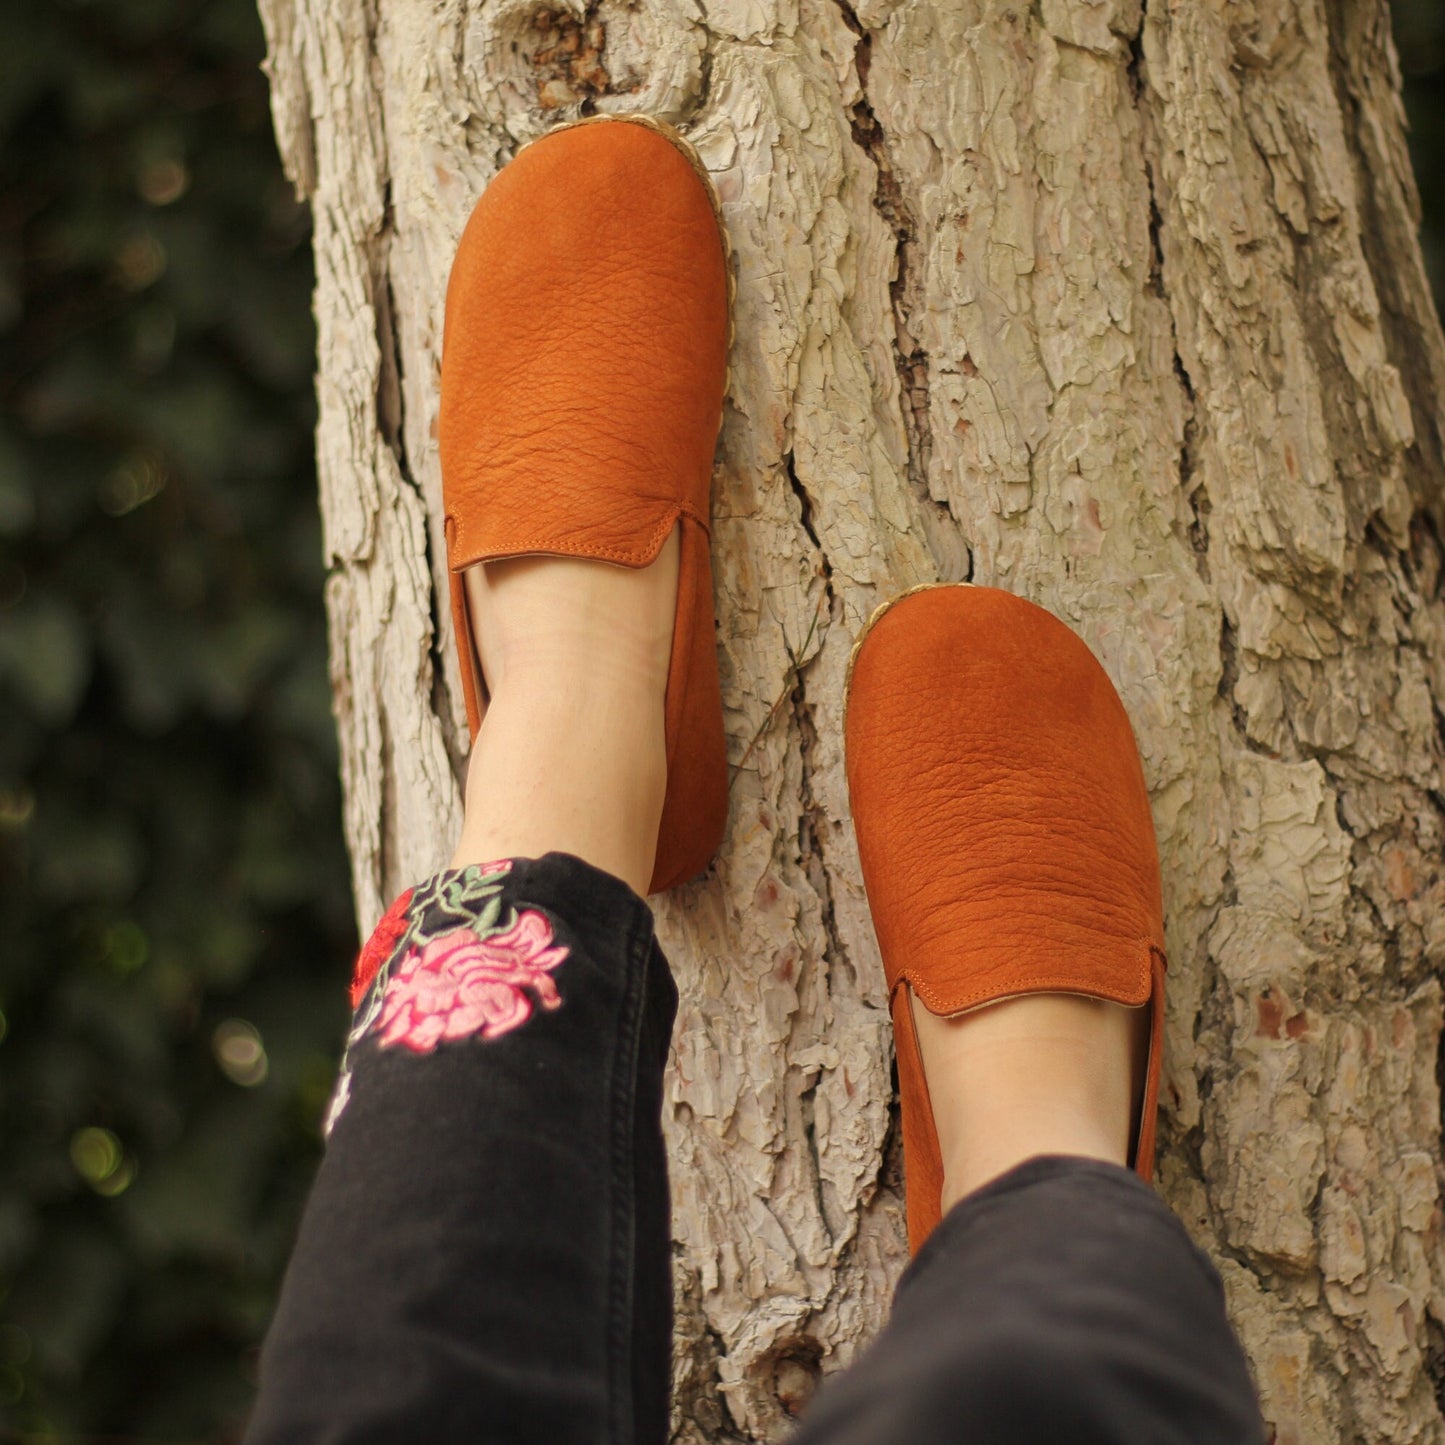 Dark Orange Nubuck Barefoot Shoes for Women with Wide Toe Box | Fashionable and Comfortable